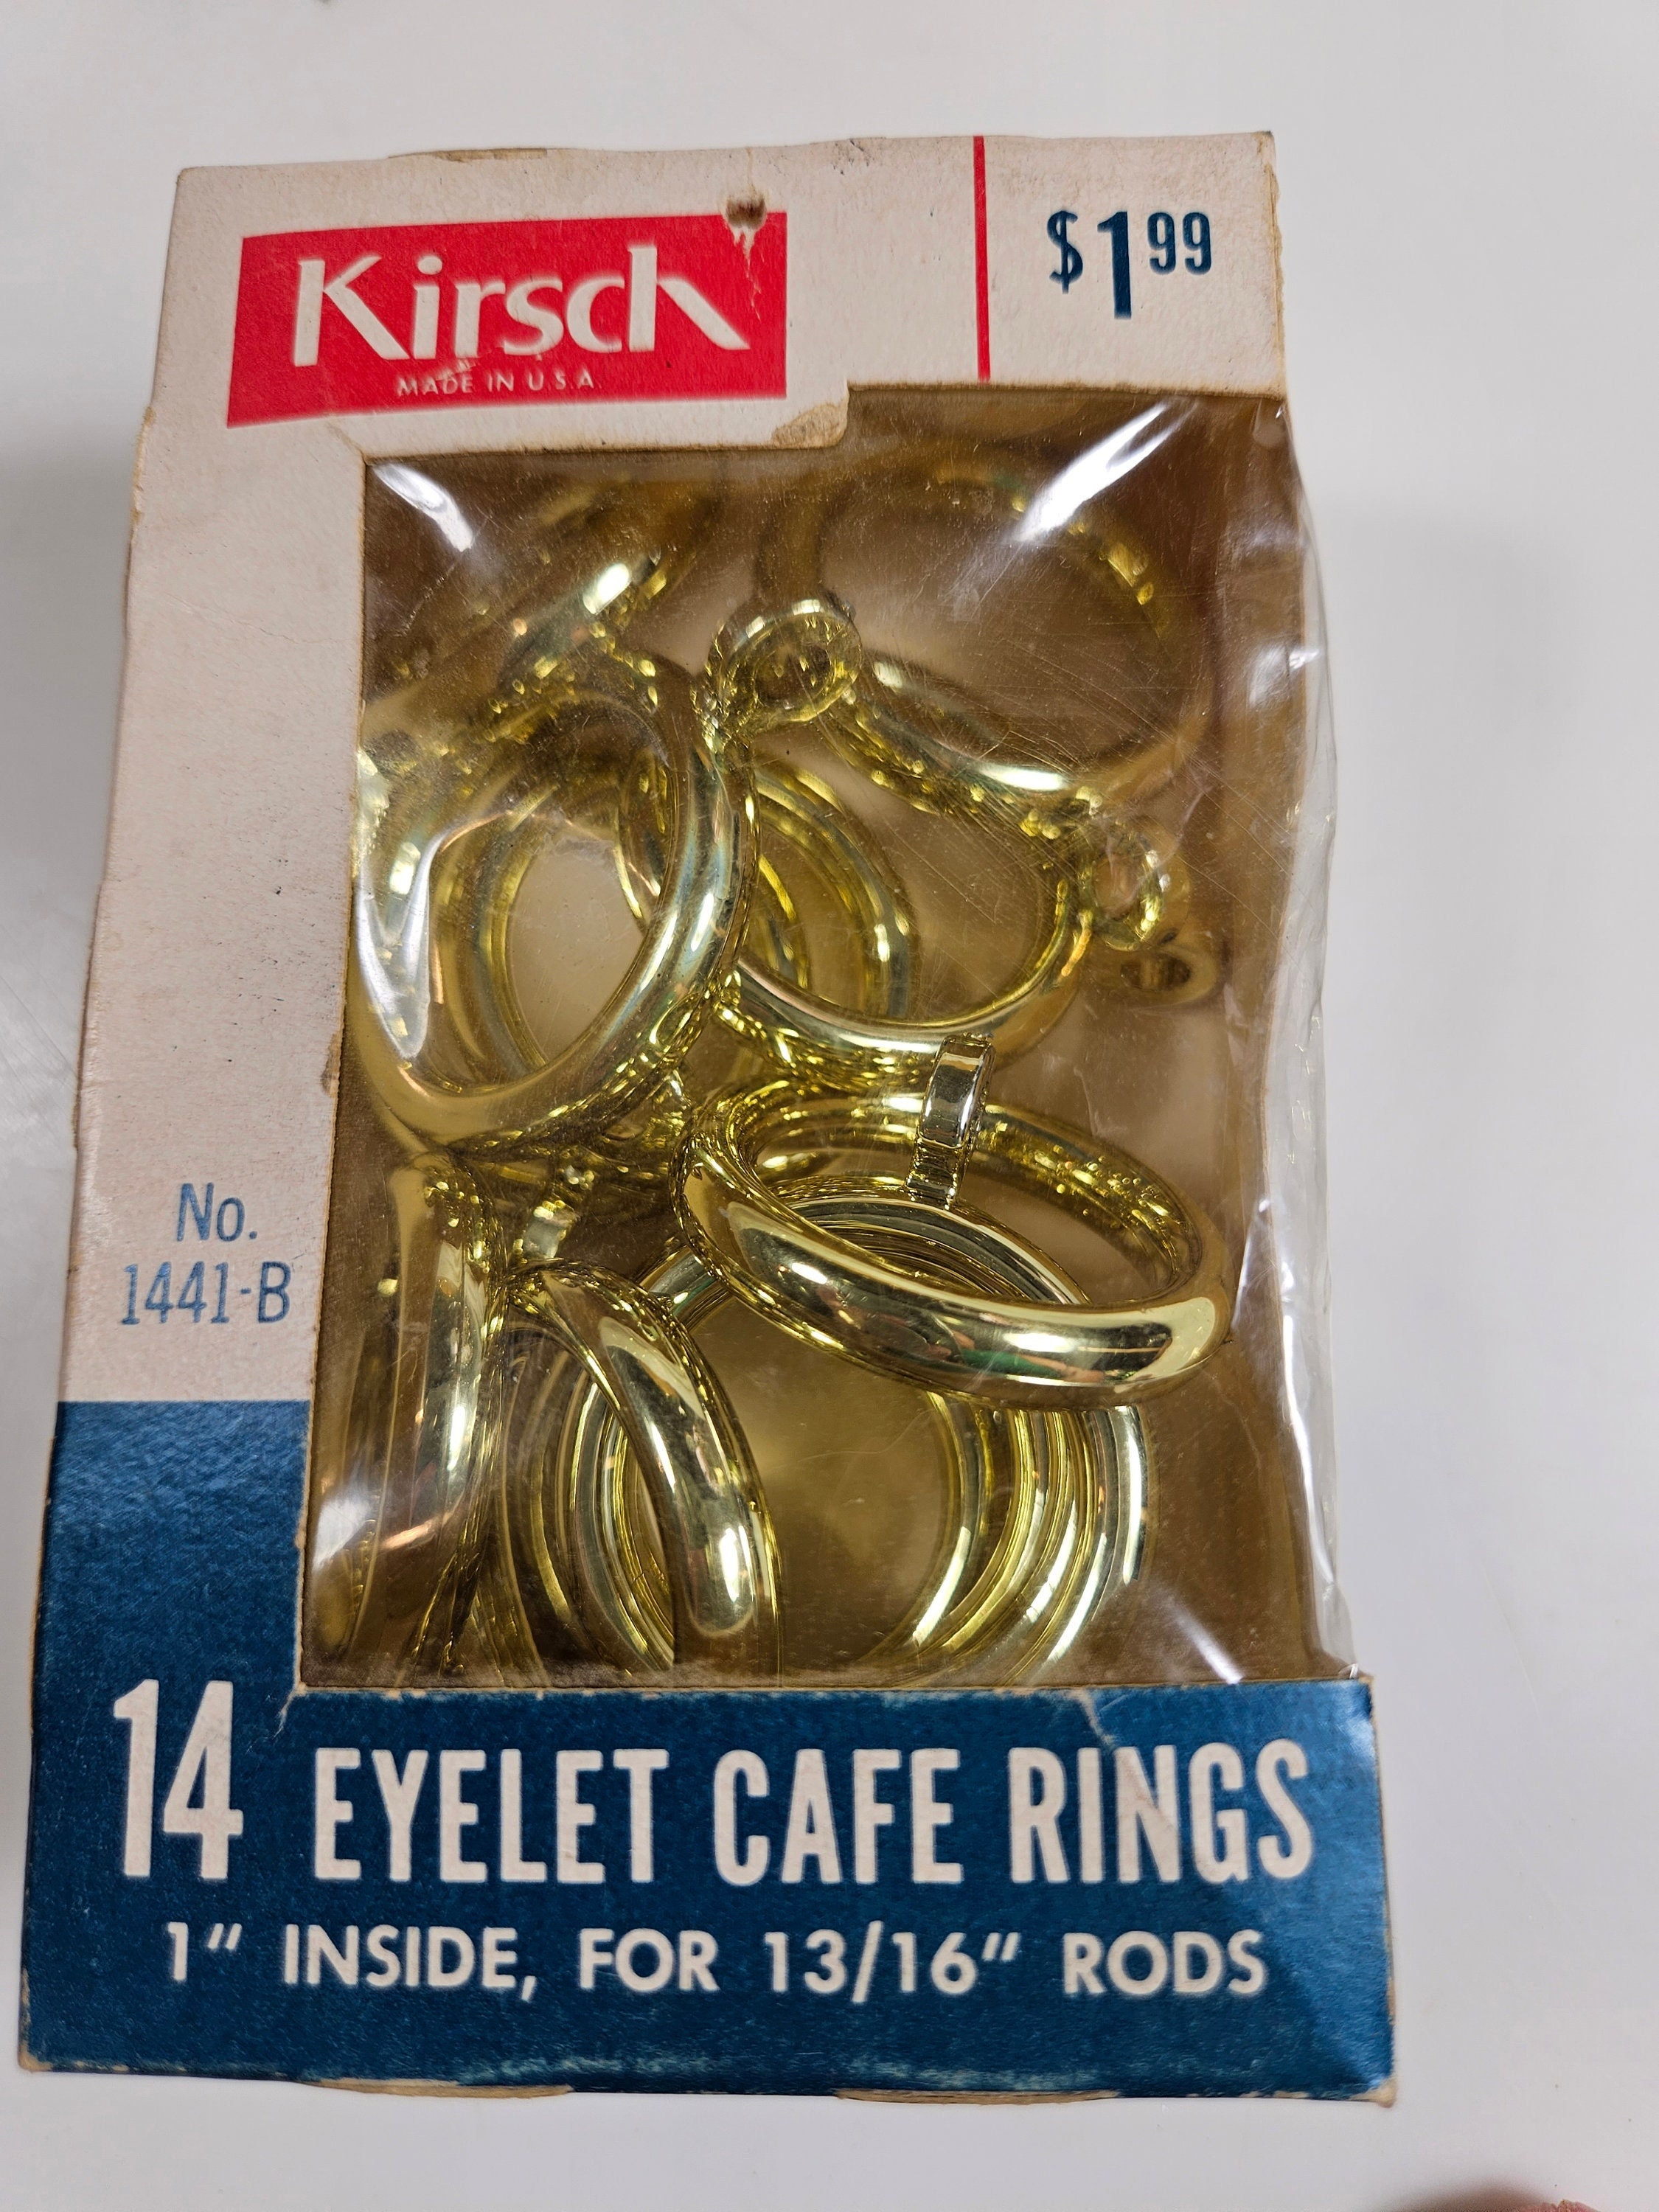 Kirsch Wood Trends Rings for 2 Curtain Rod~4 Pack